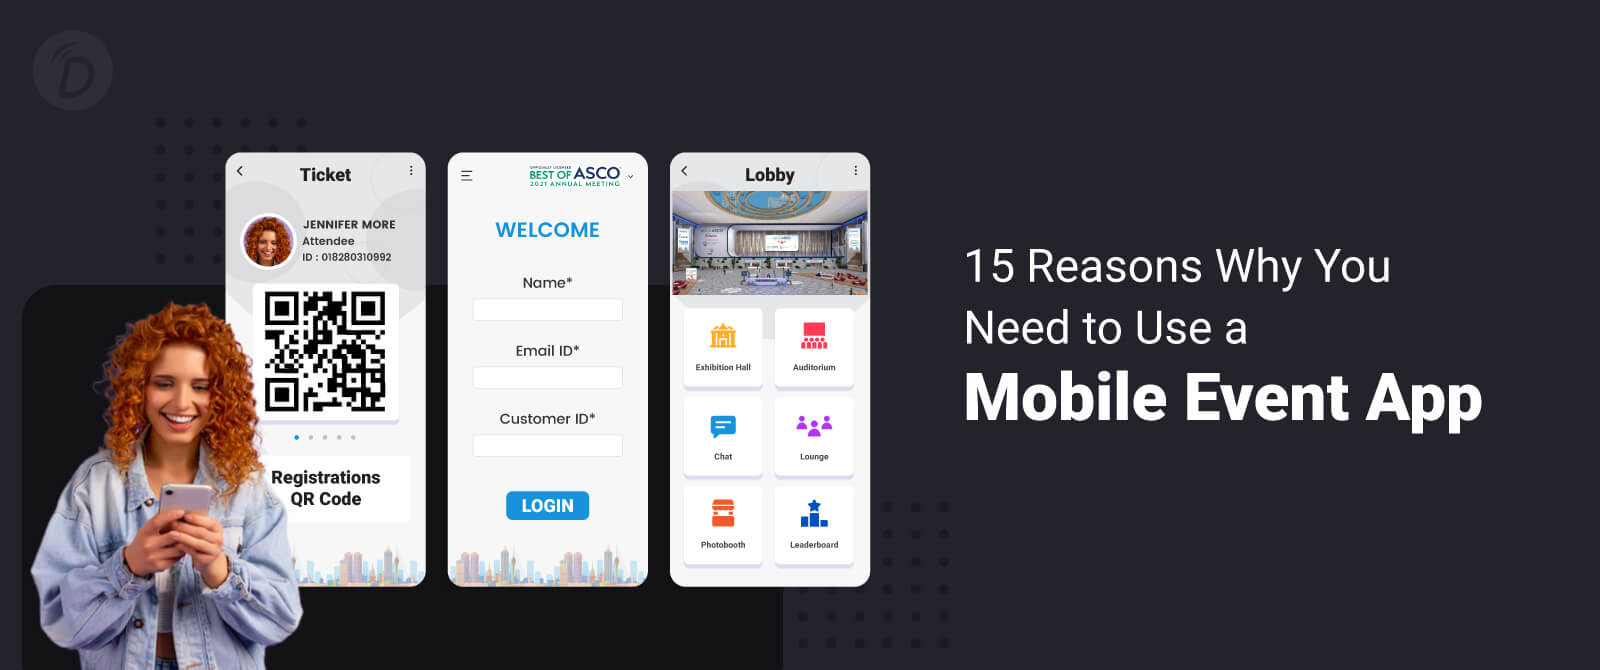 15 Reasons Why You Need to Use a Mobile Event App